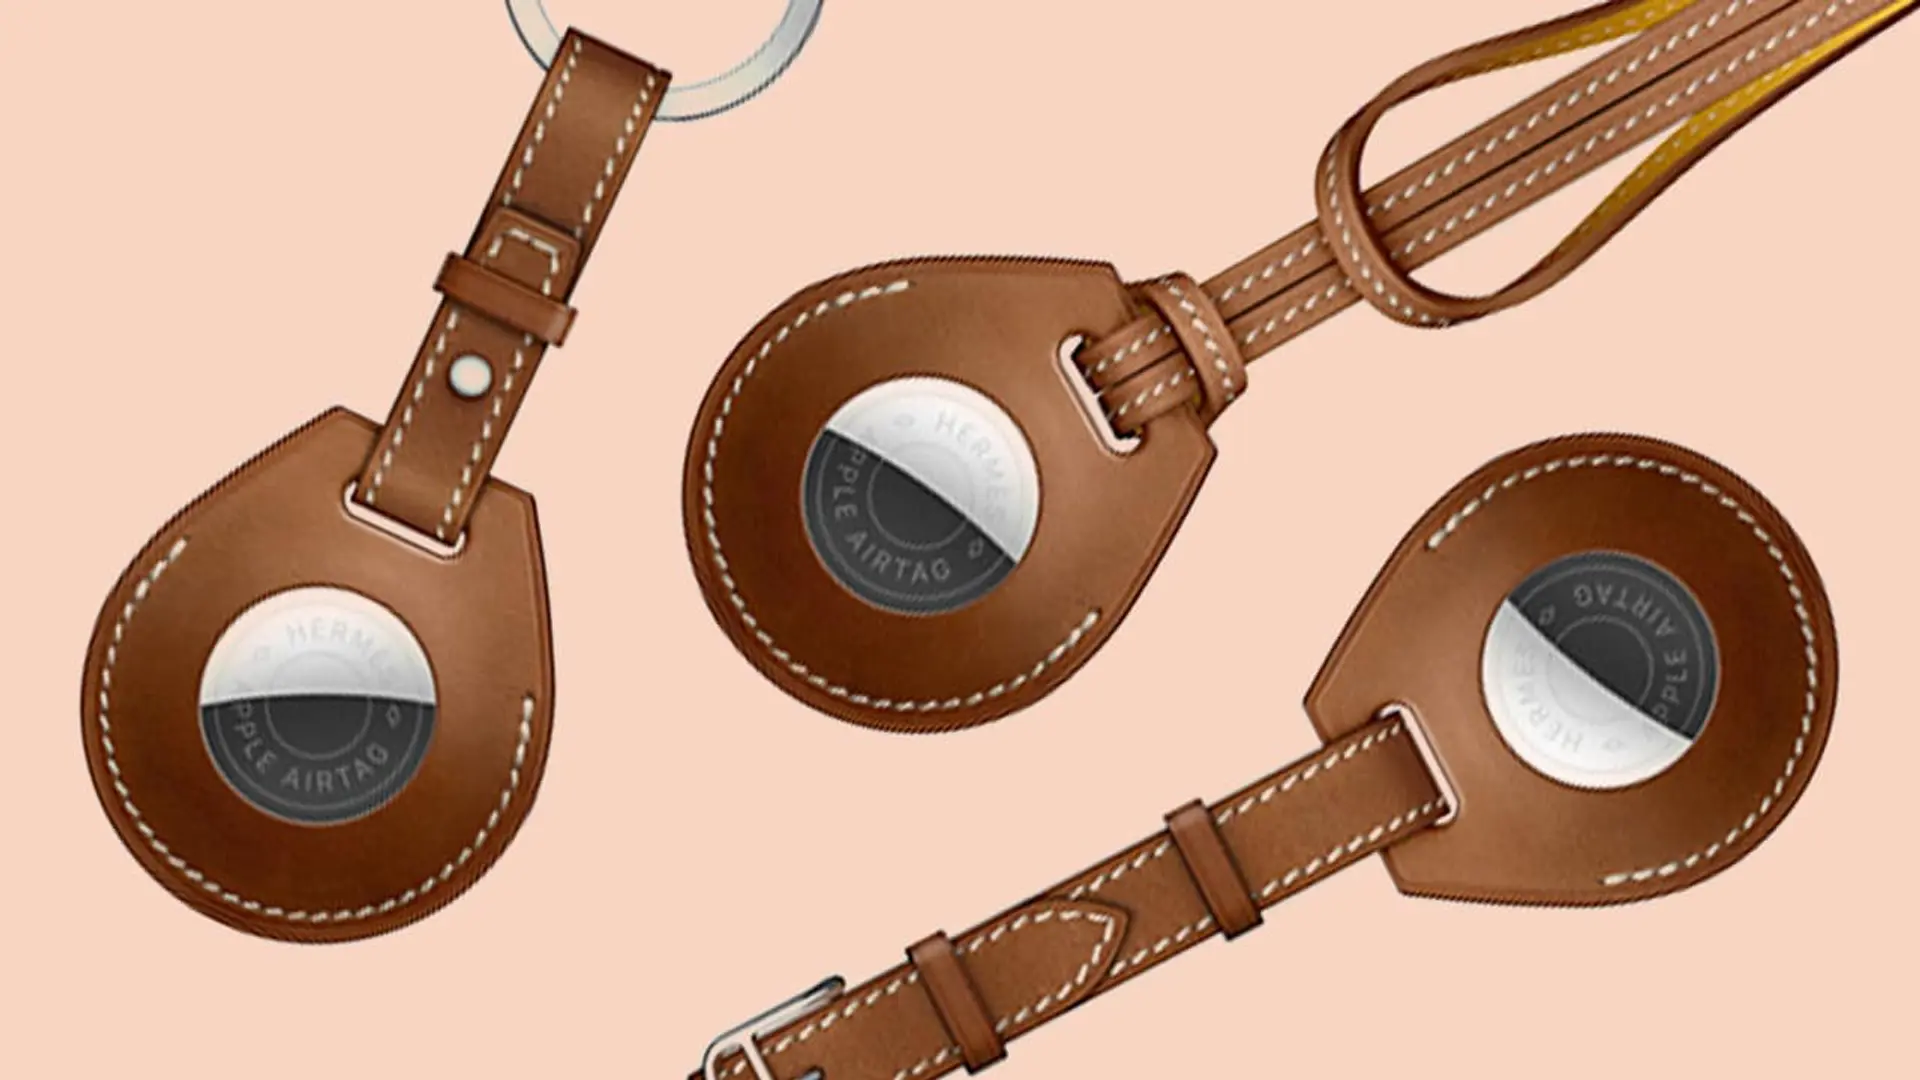 Lifestyle News - Hermès and Apple unveil AirTag accoutrements